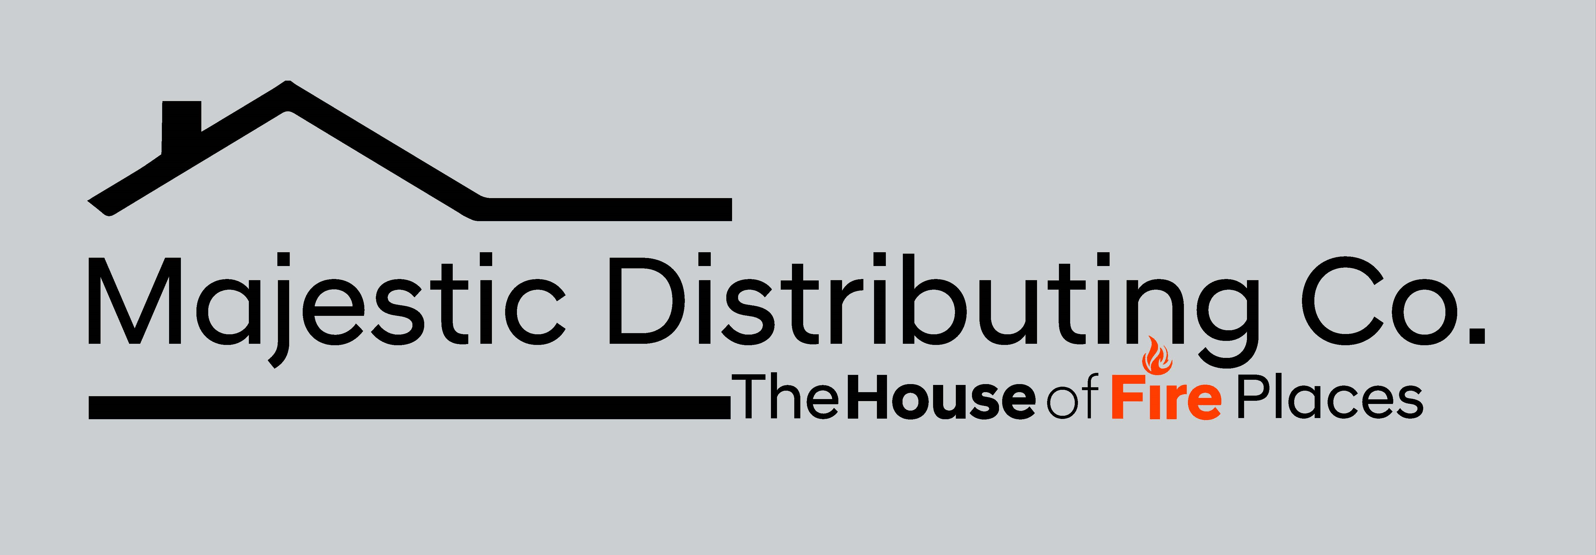 Majestic Distributing Co-The House of Fireplaces | Logo